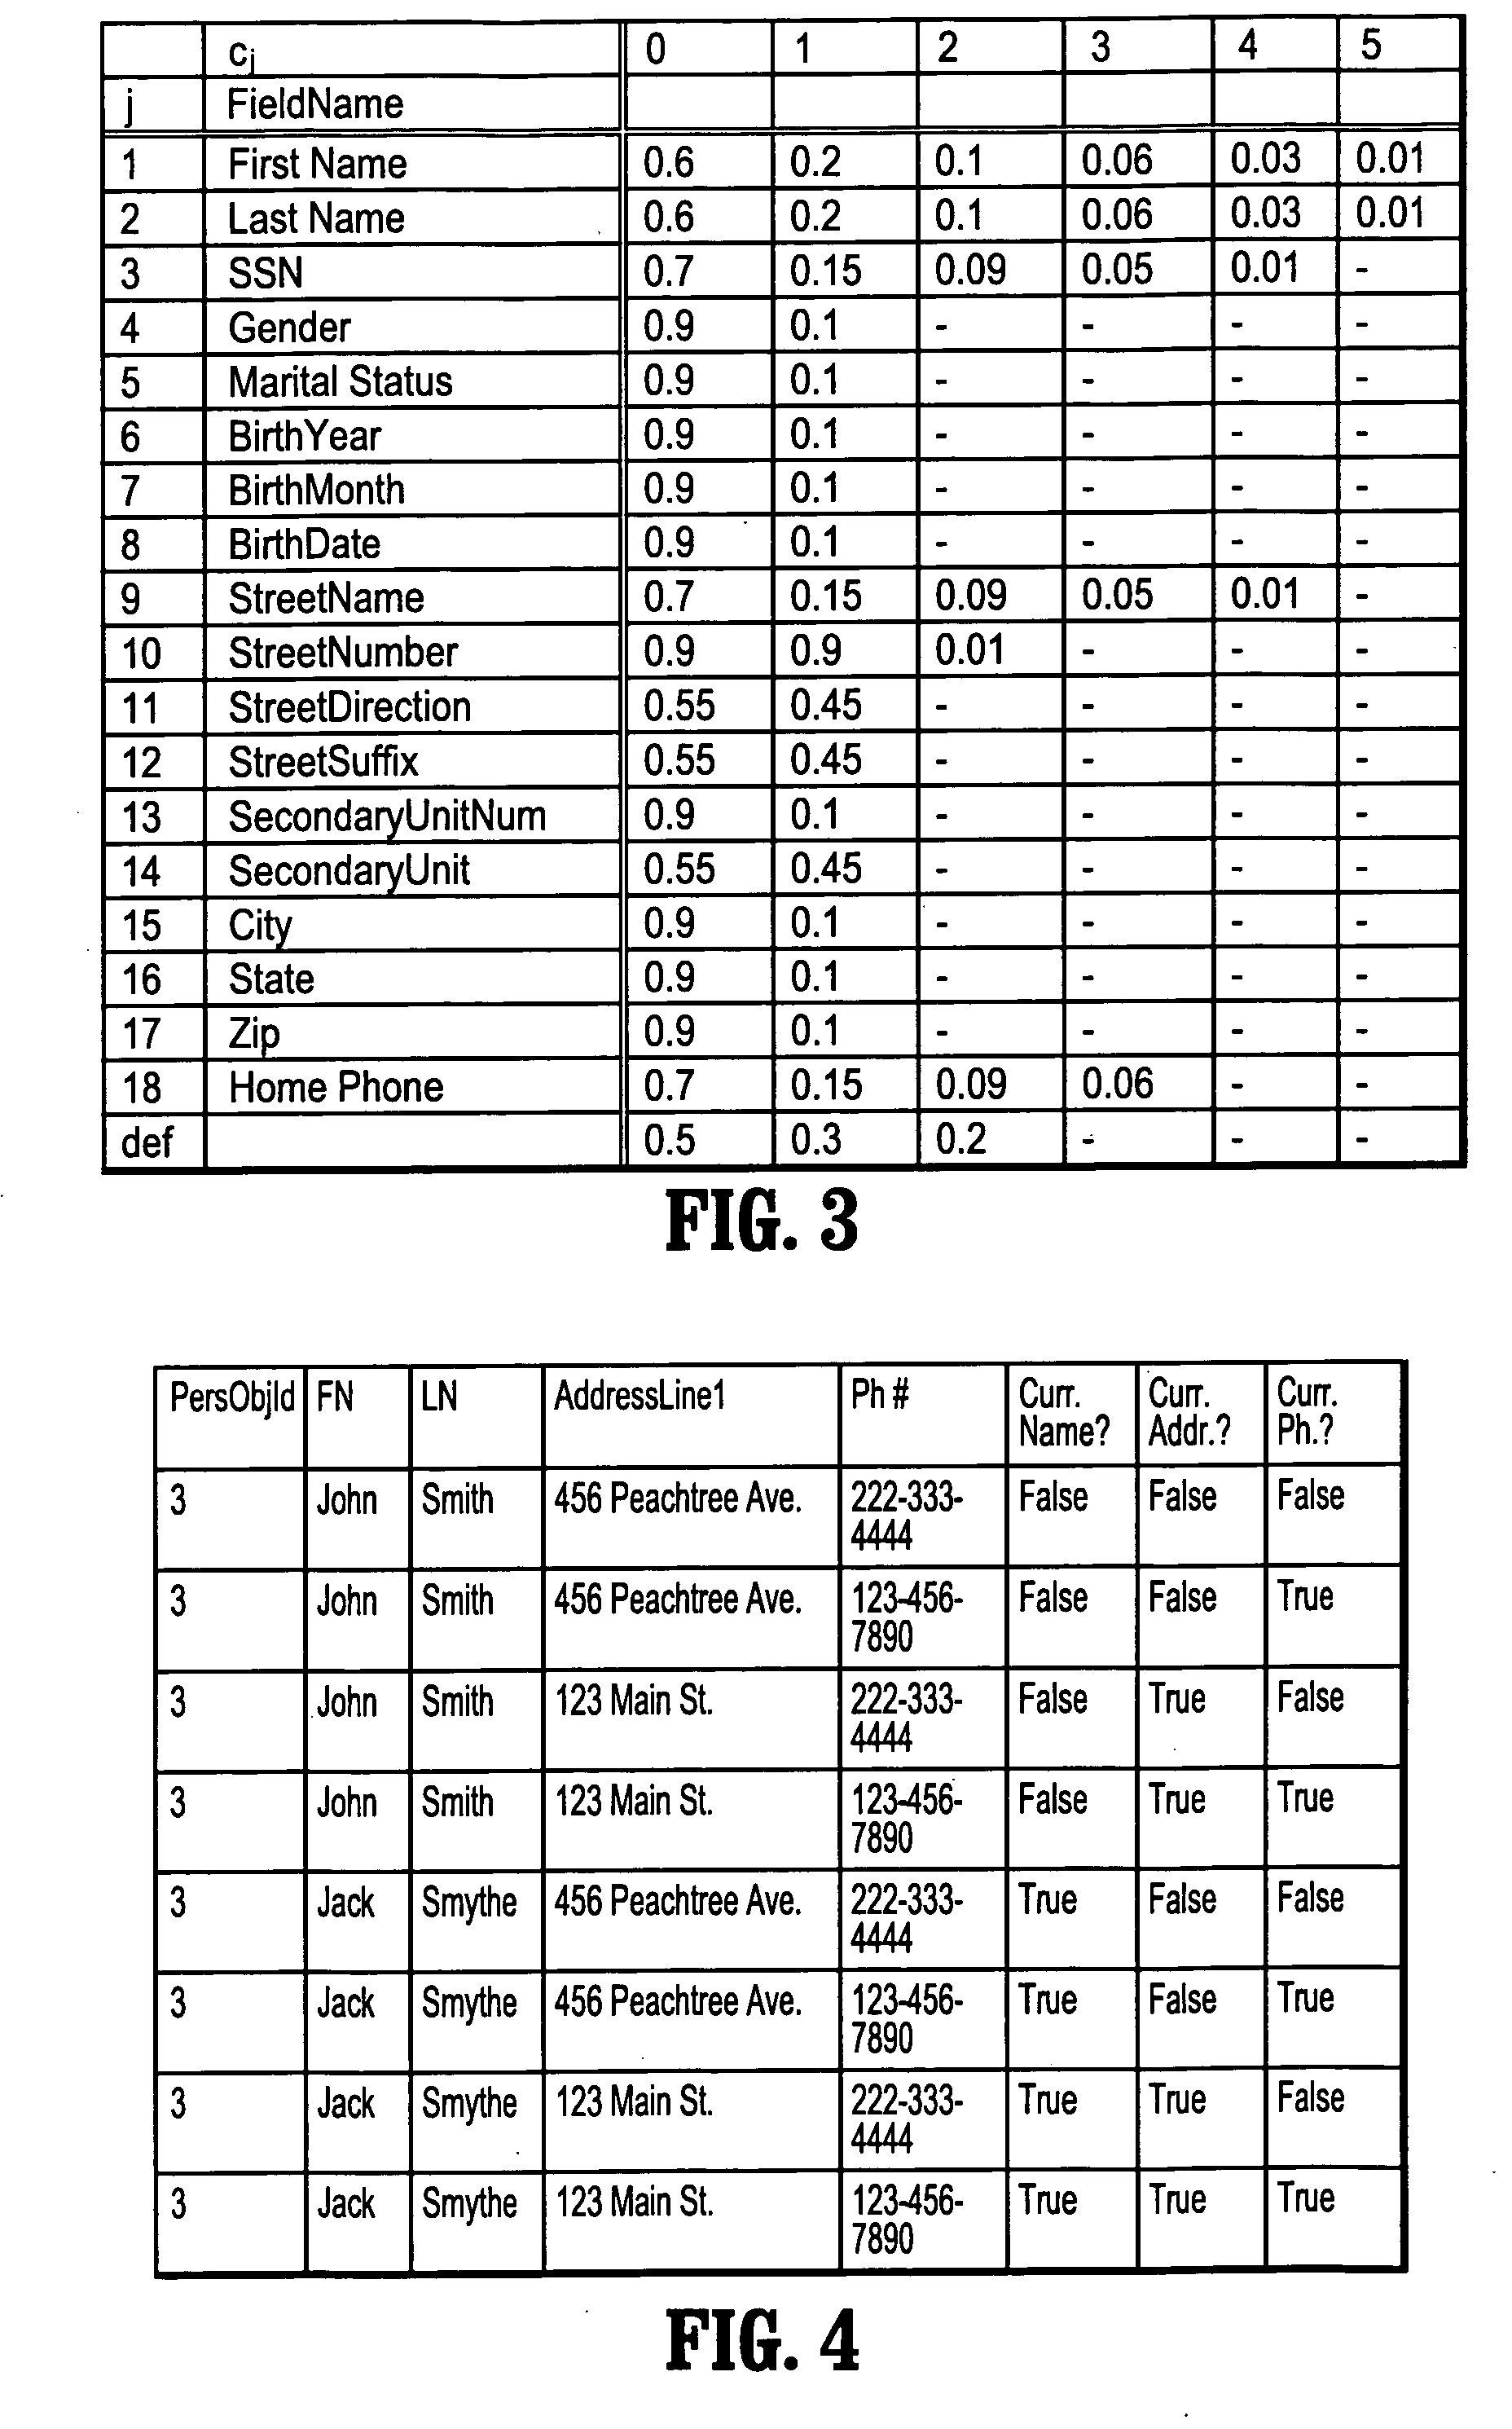 System and method for data sensitive filtering of patient demographic record queries